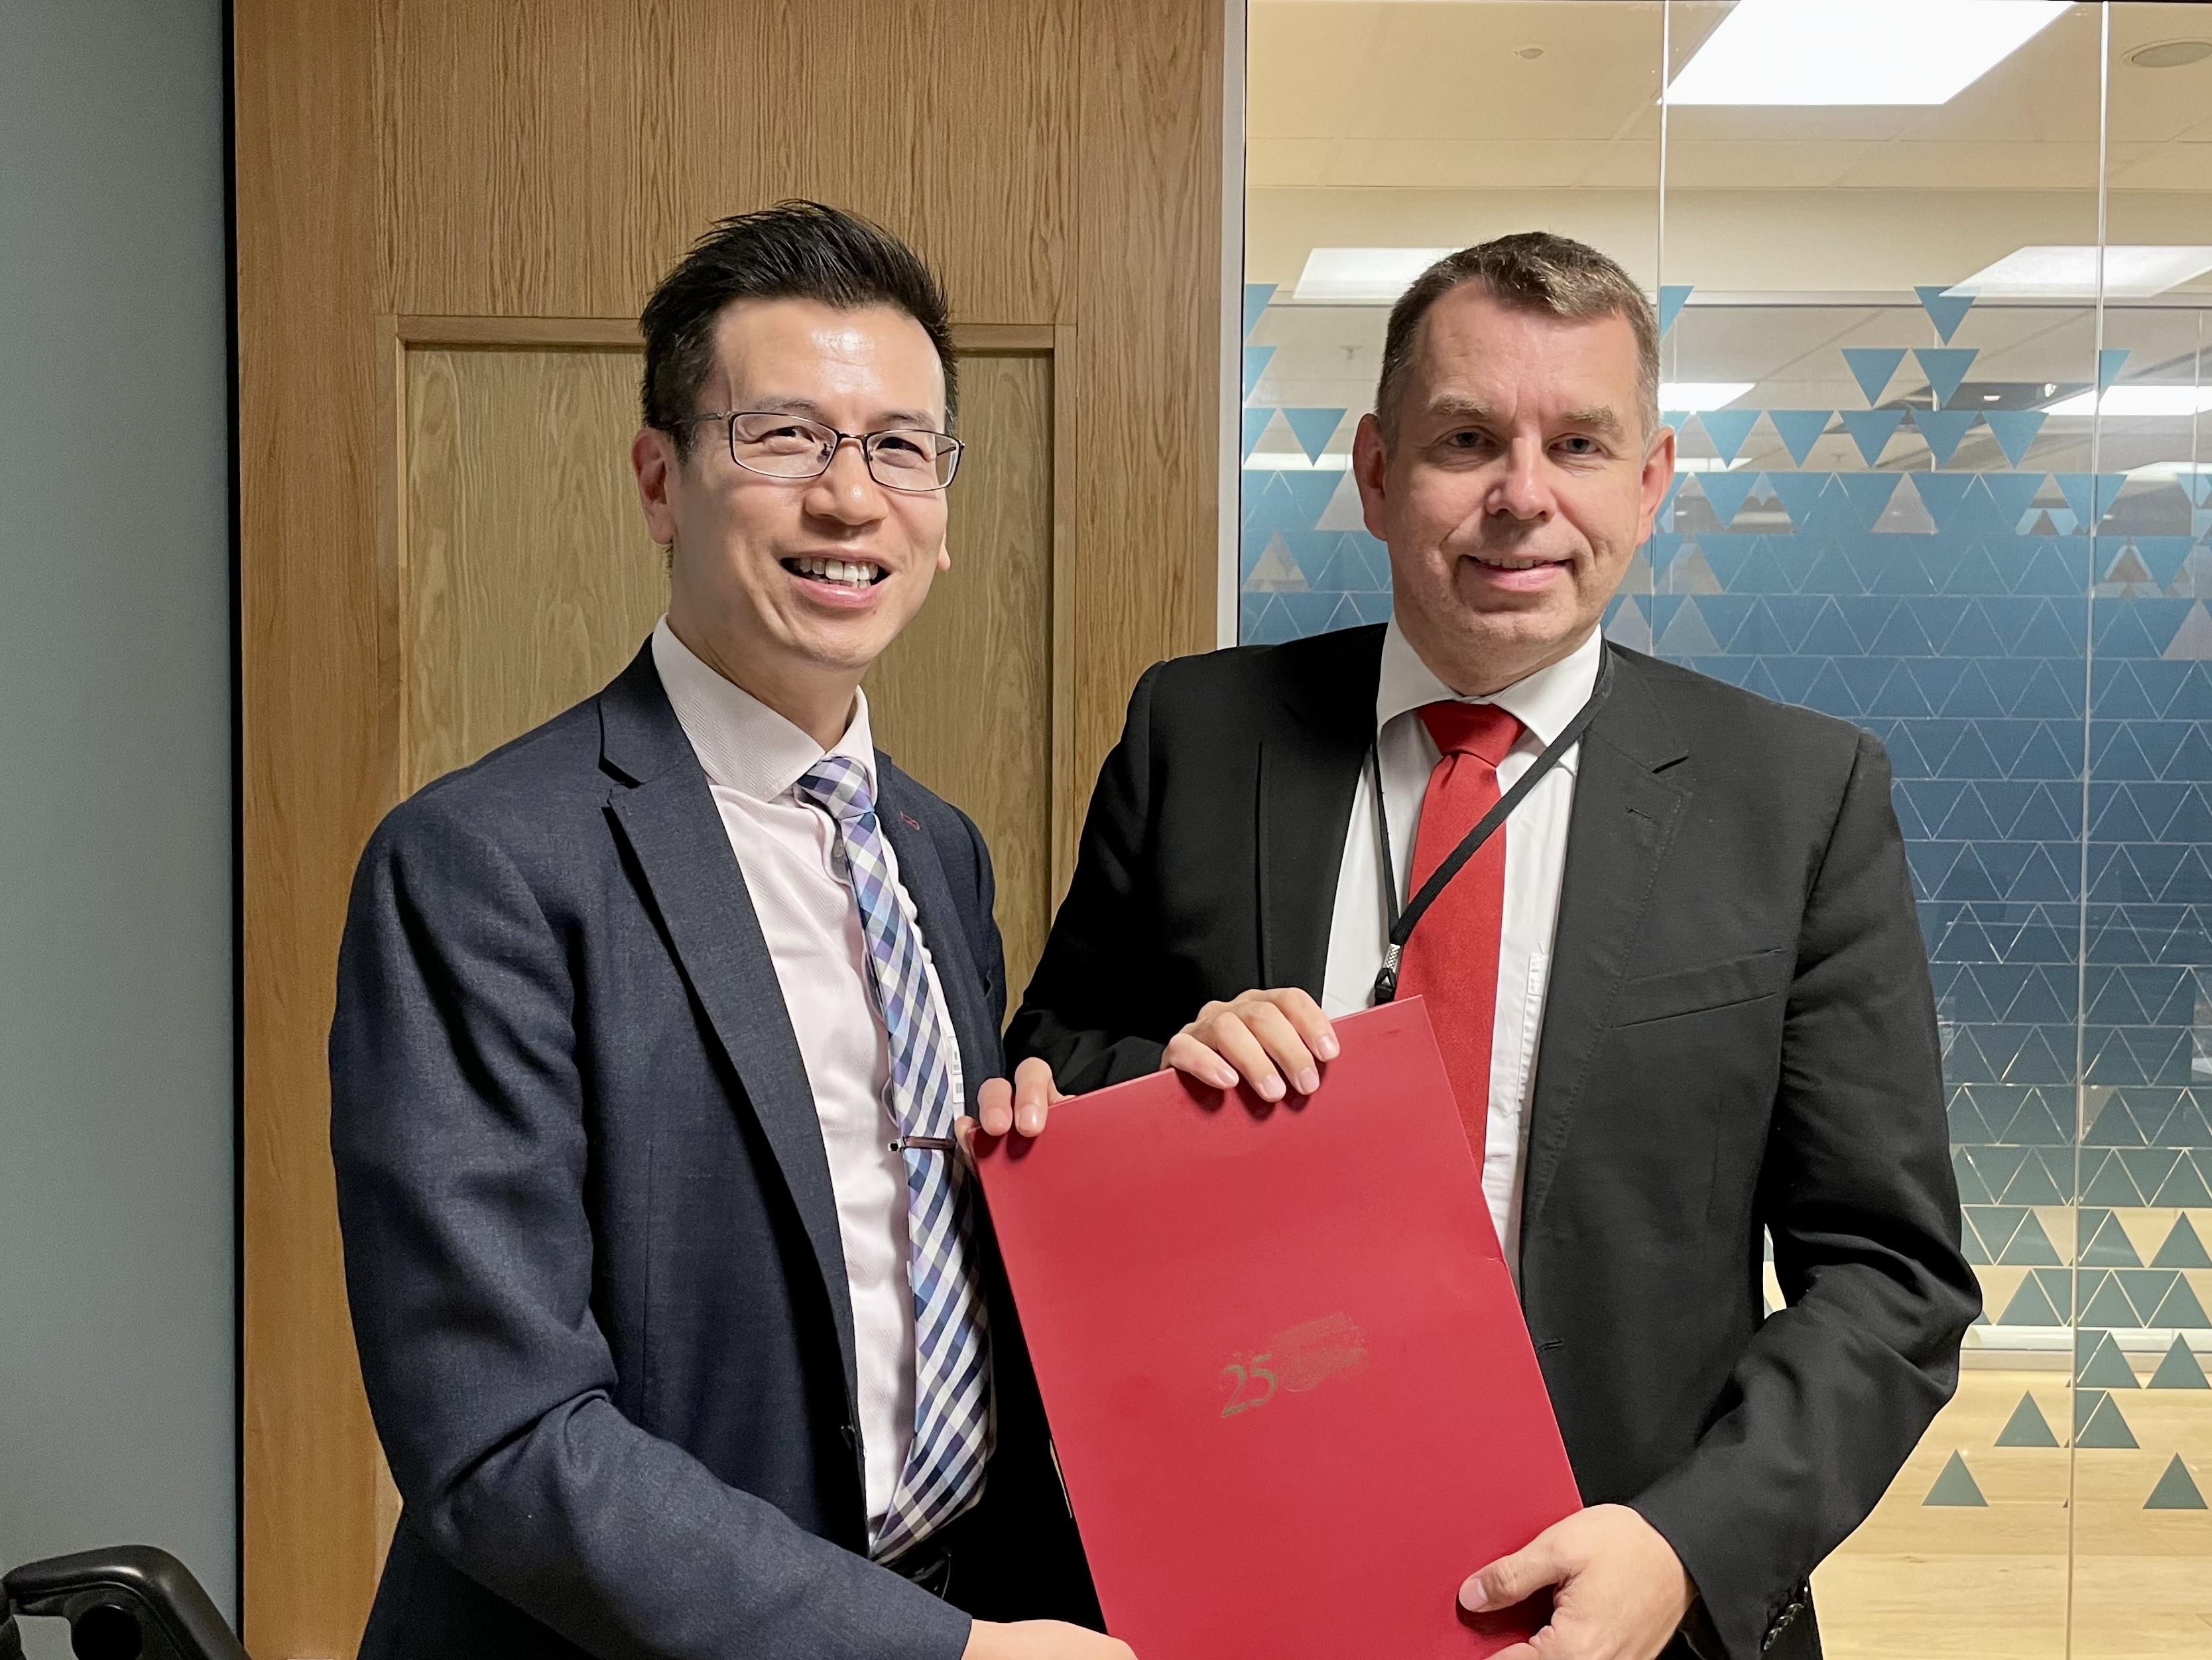 The Director-General of the Hong Kong Economic and Trade Office, London, Mr Gilford Law (left) calling on the State Secretary of the Norwegian Ministry of Trade, Industry and Fisheries, Mr Halvard Ingebrigtsen (right).